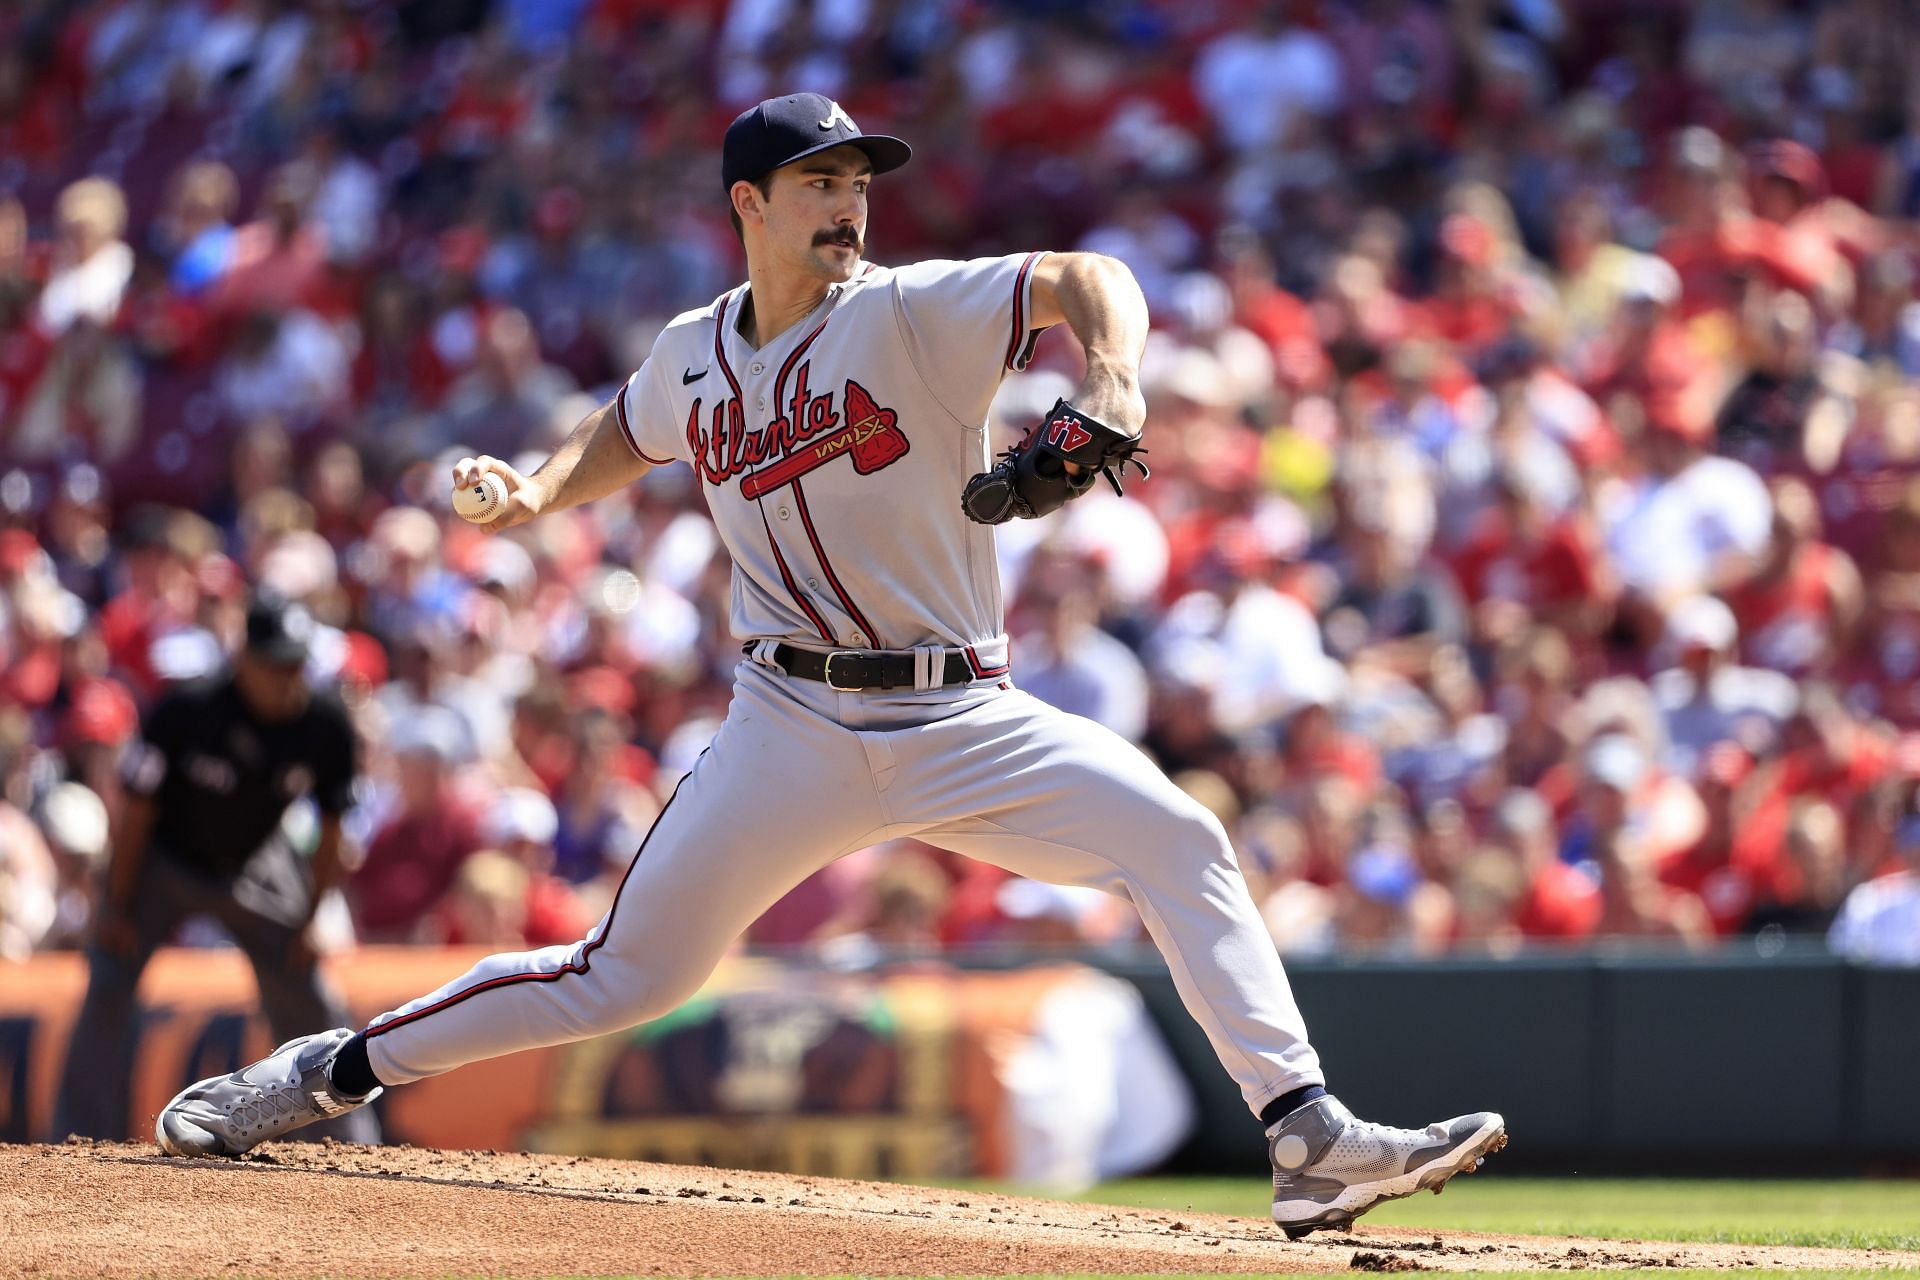 Braves Ace Spencer Strider Ripped for Saying He Wishes Fans Weren